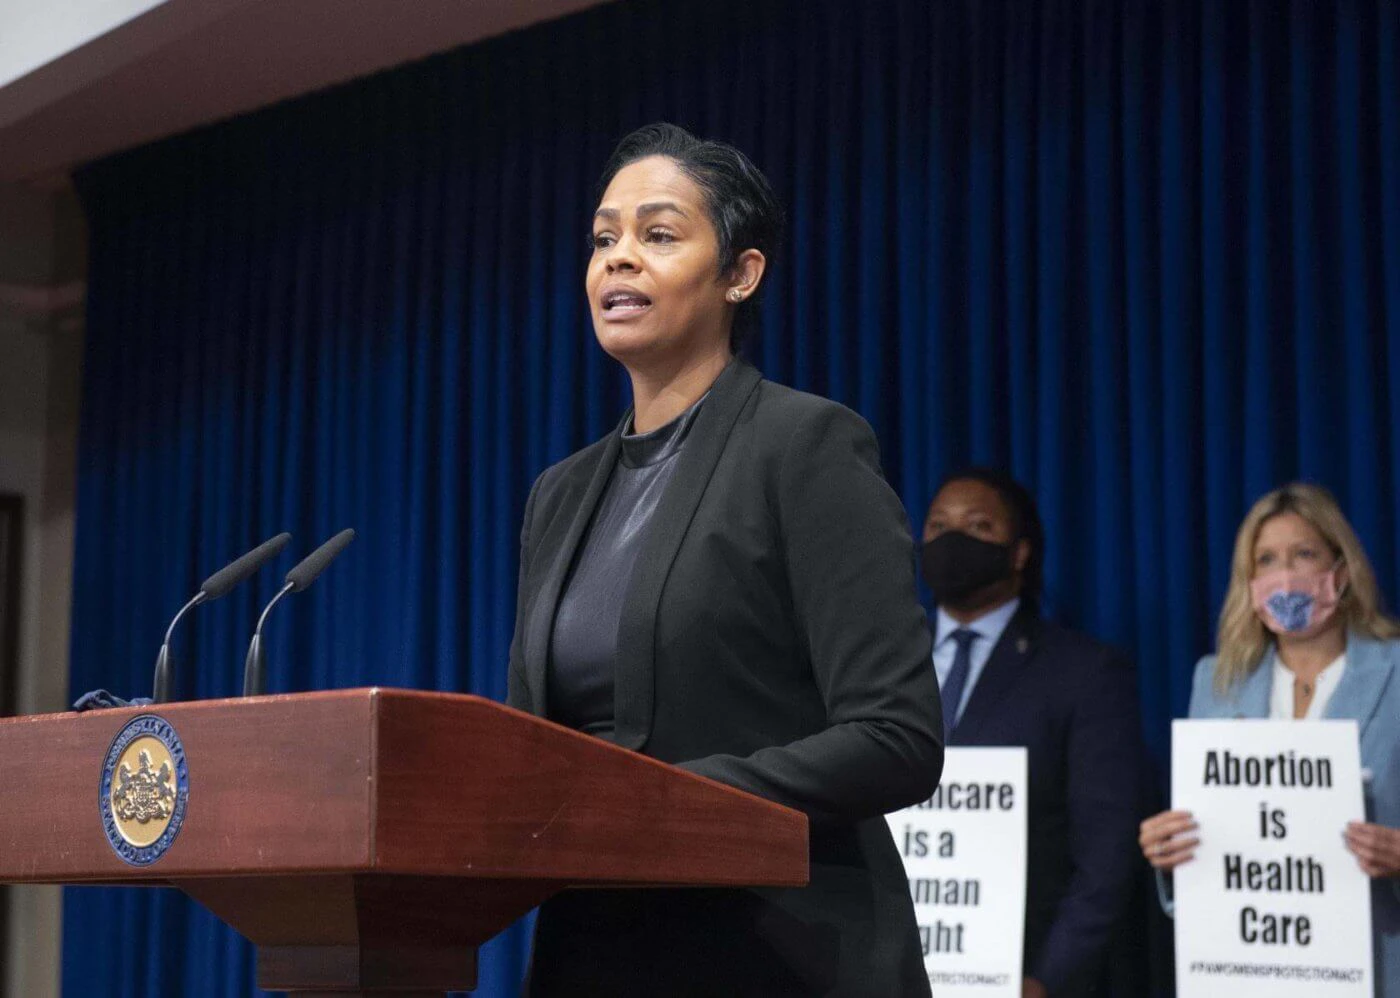 State Rep. Morgan Cephas (D-Philadelphia) speaks at a news conference about the Pennsylvania Women's Health Protection Act. (Courtesy of Pennsylvania House of Representatives)